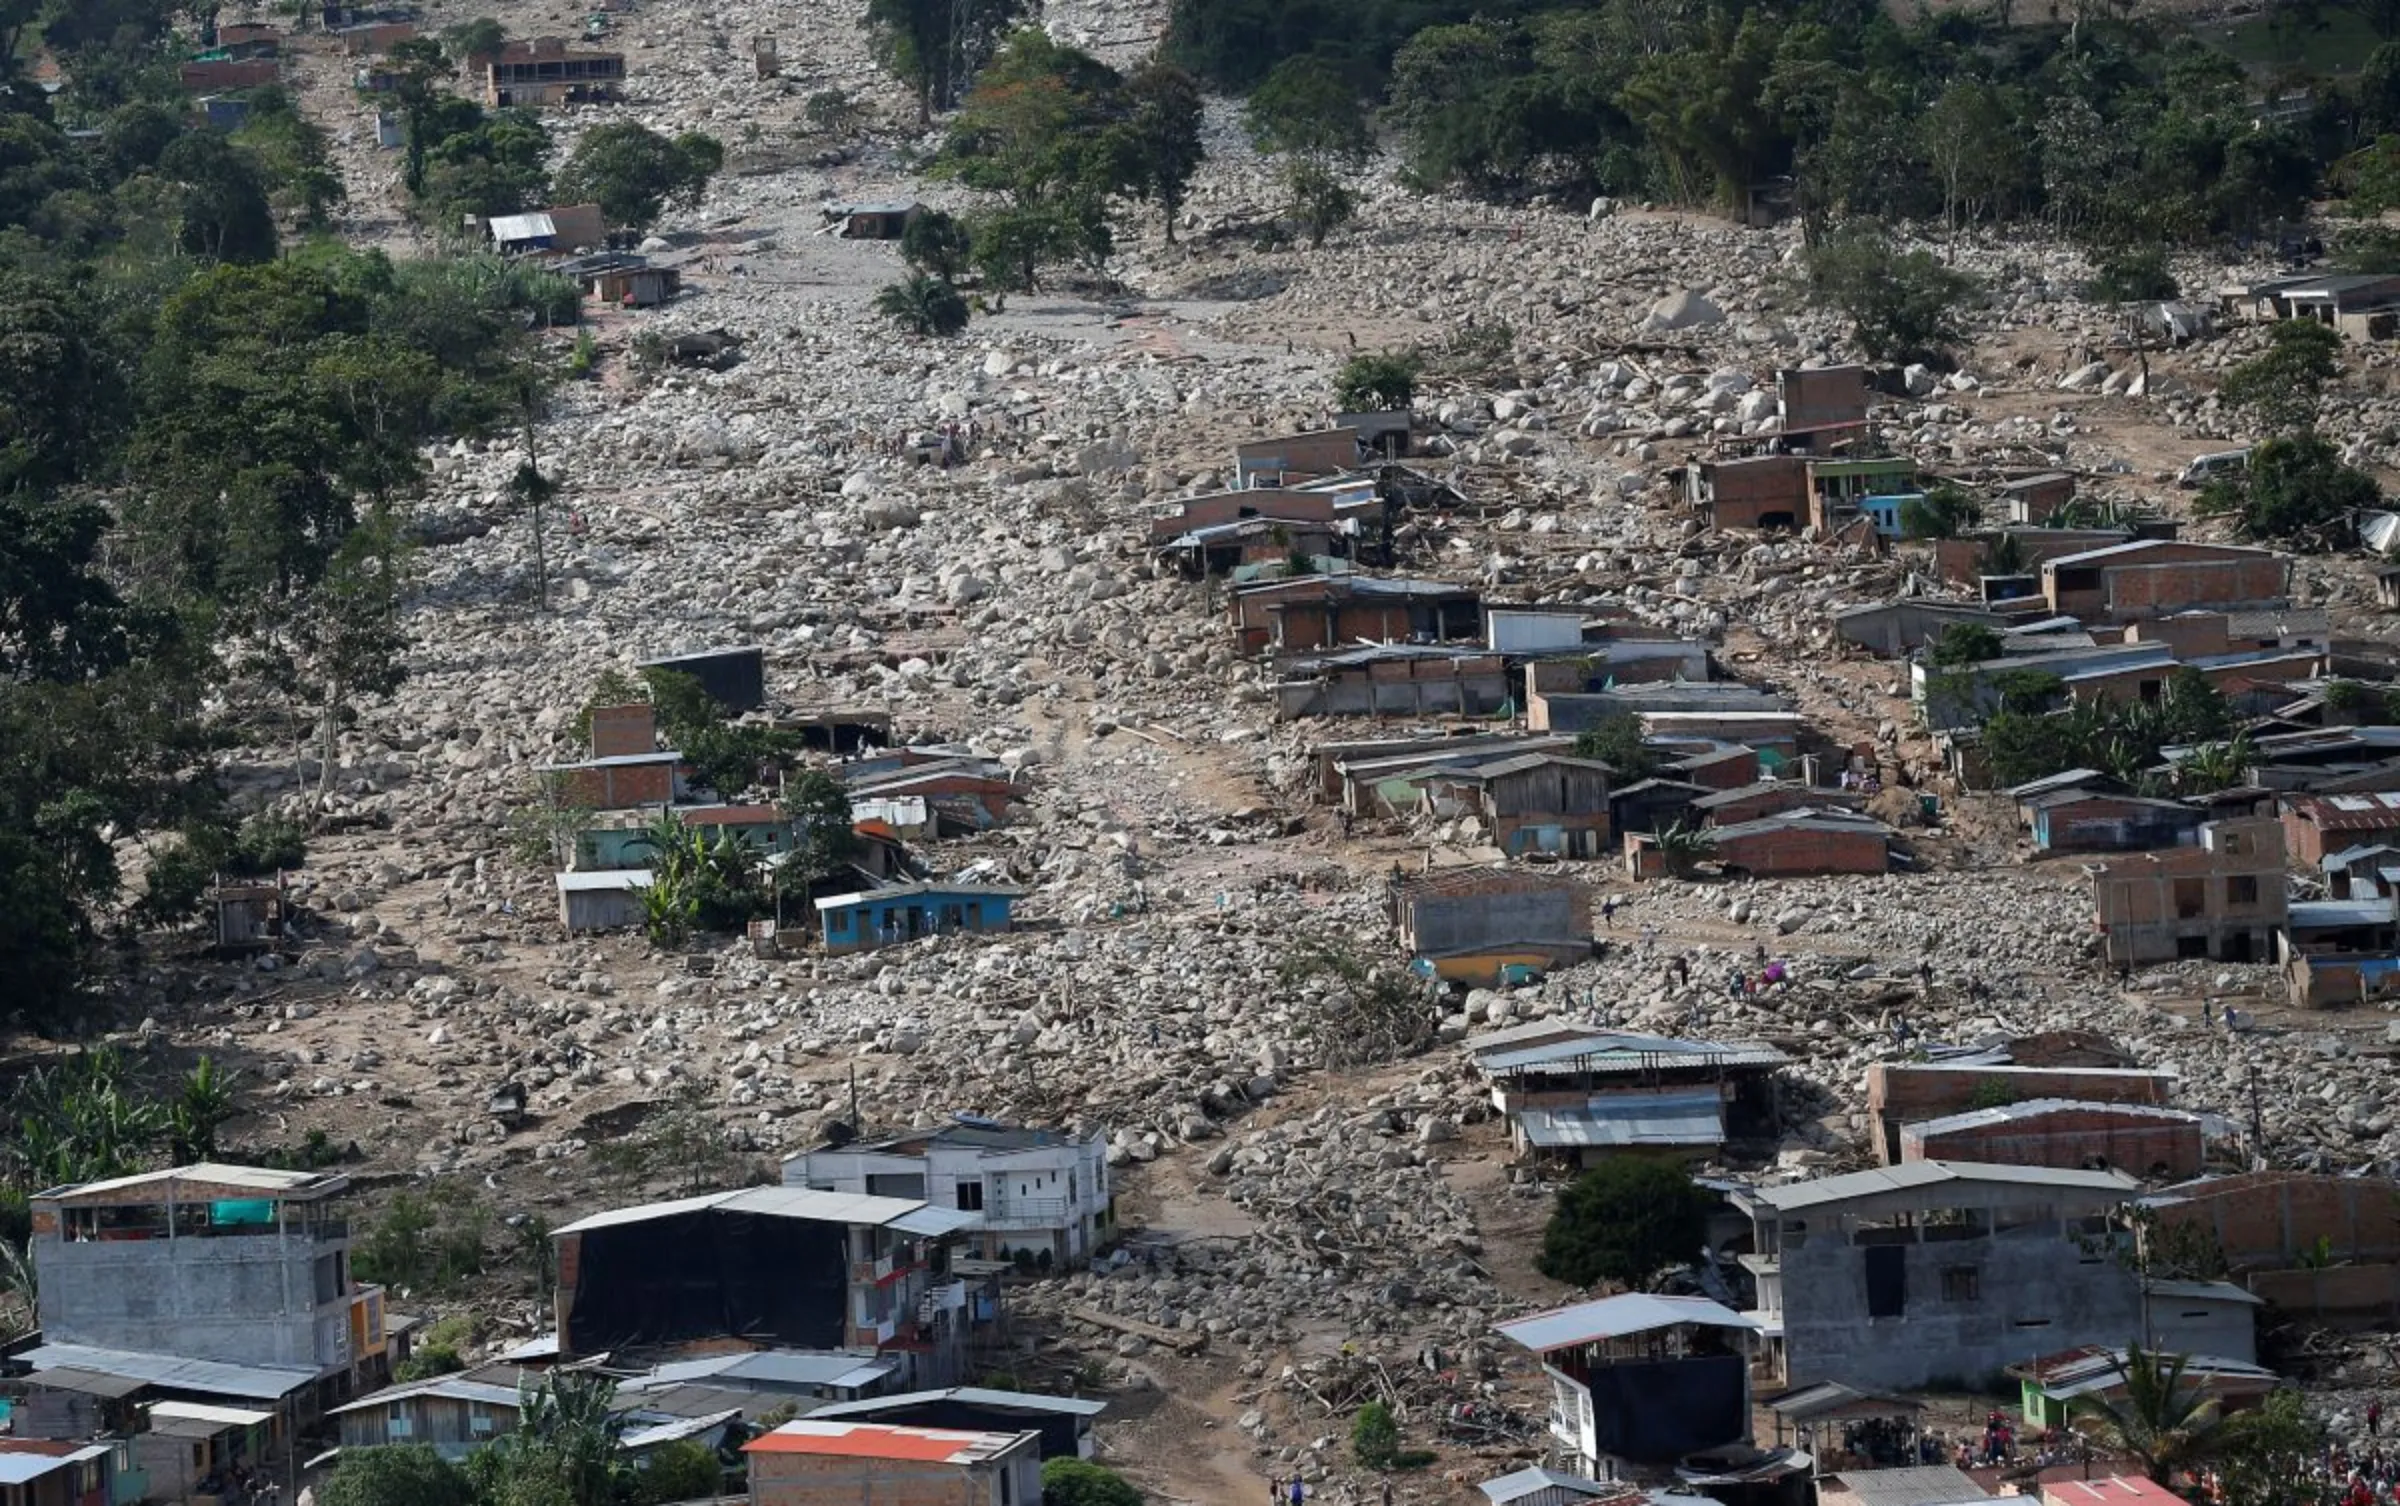 Aerial view of a neighborhood destroyed after flooding and mudslides caused by heavy rains leading several rivers to overflow, pushing sediment and rocks into buildings and roads, in Mocoa, Colombia April 3, 2017. REUTERS/Jaime Saldarriaga